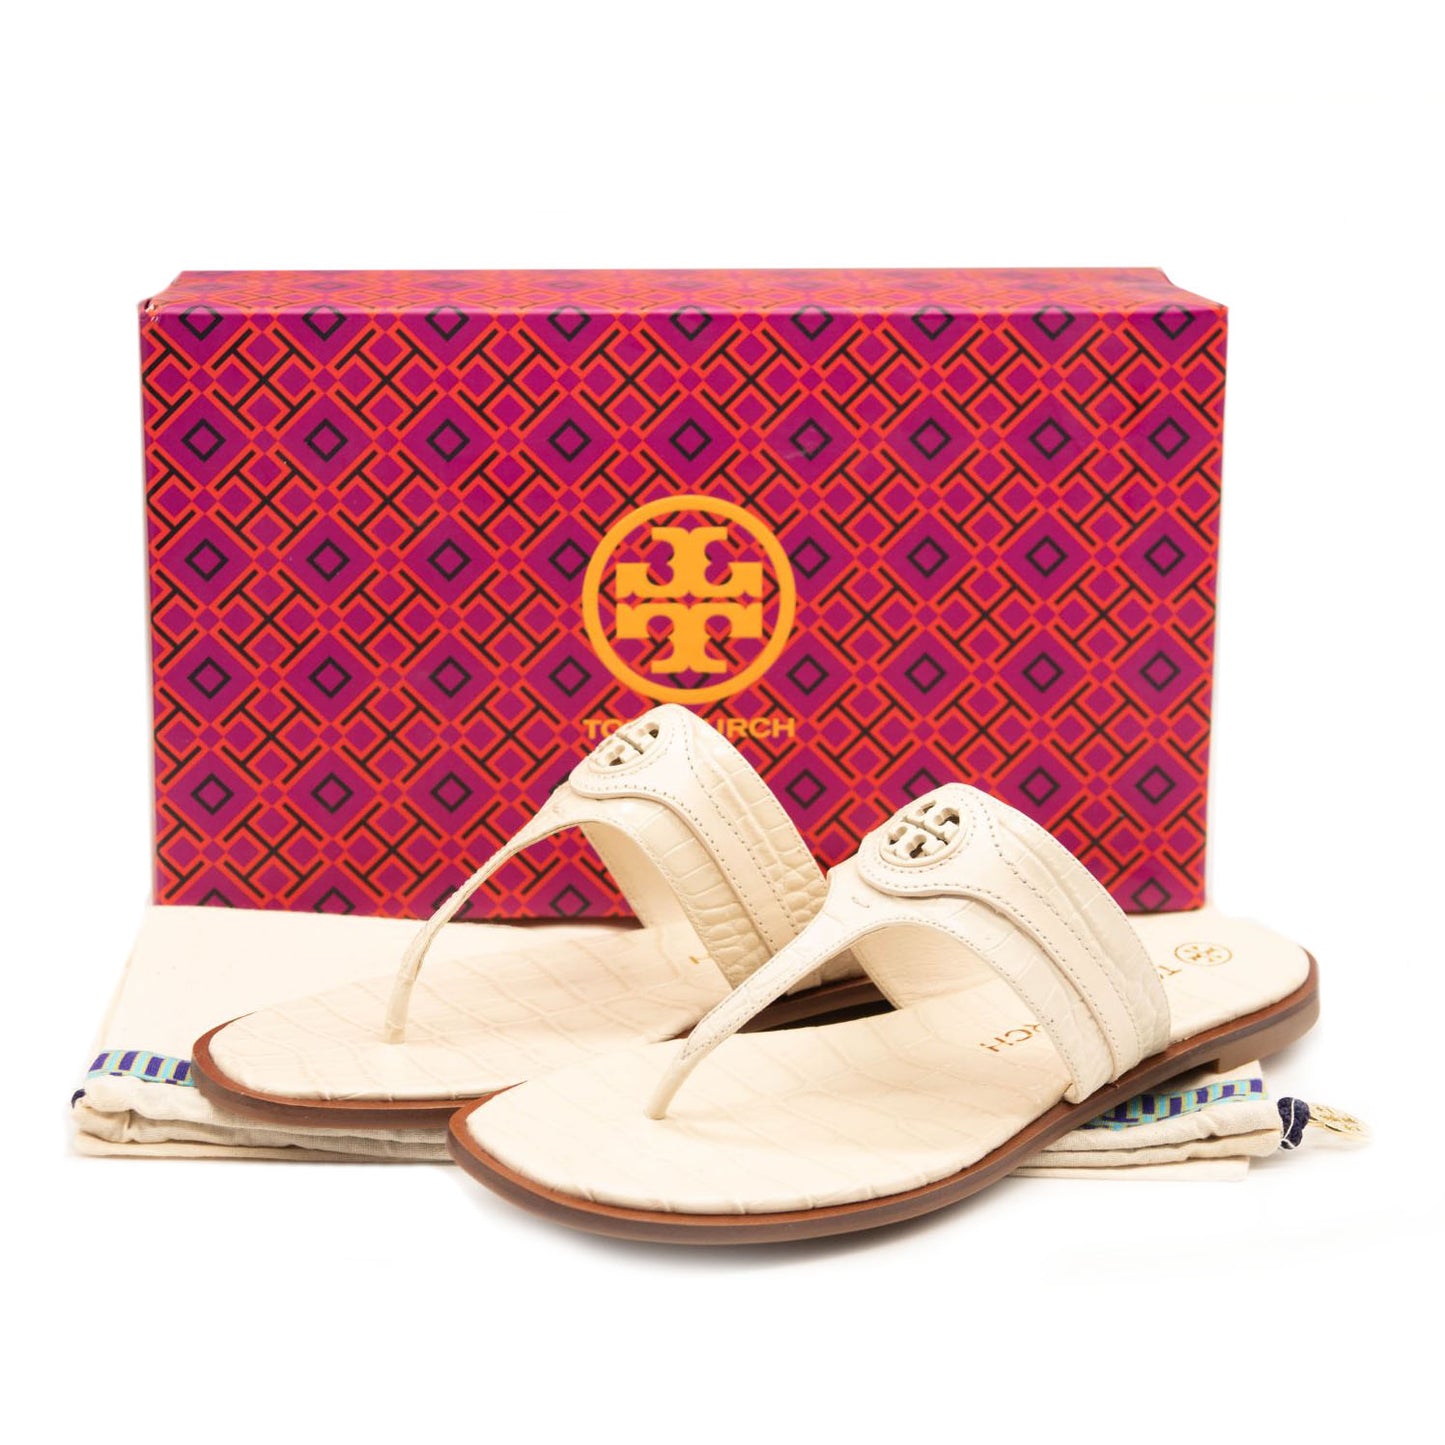 NEW $248 TORY BURCH OFF WHITE NEW CARSON THONG WELT CROC SANDALS US 9